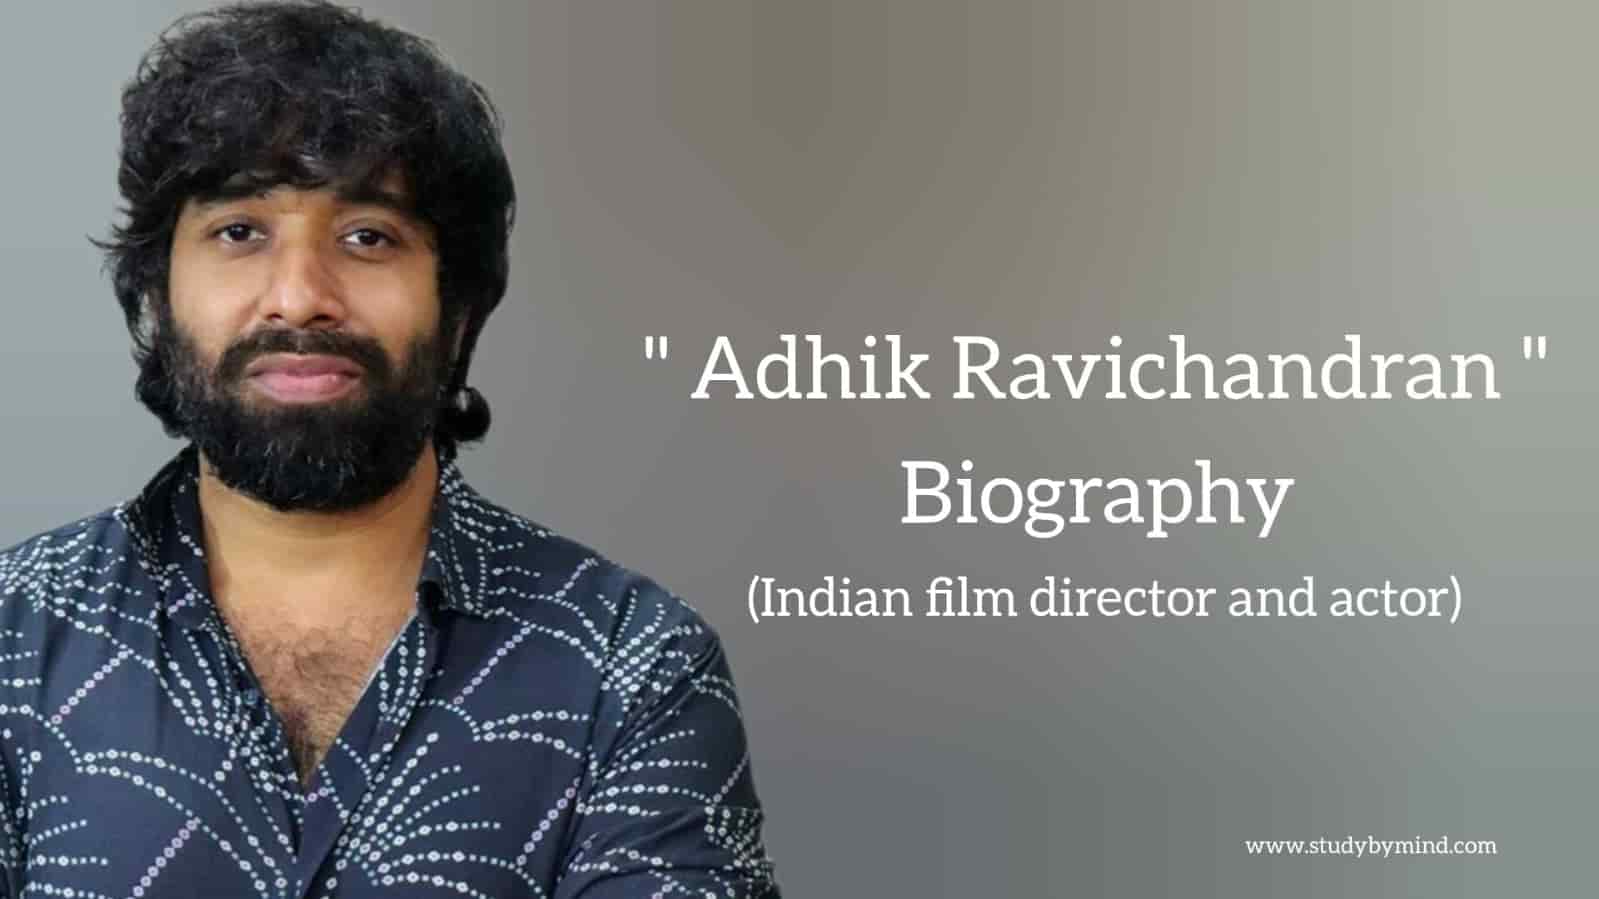 You are currently viewing Adhik ravichandran biography in english (Film Producer)